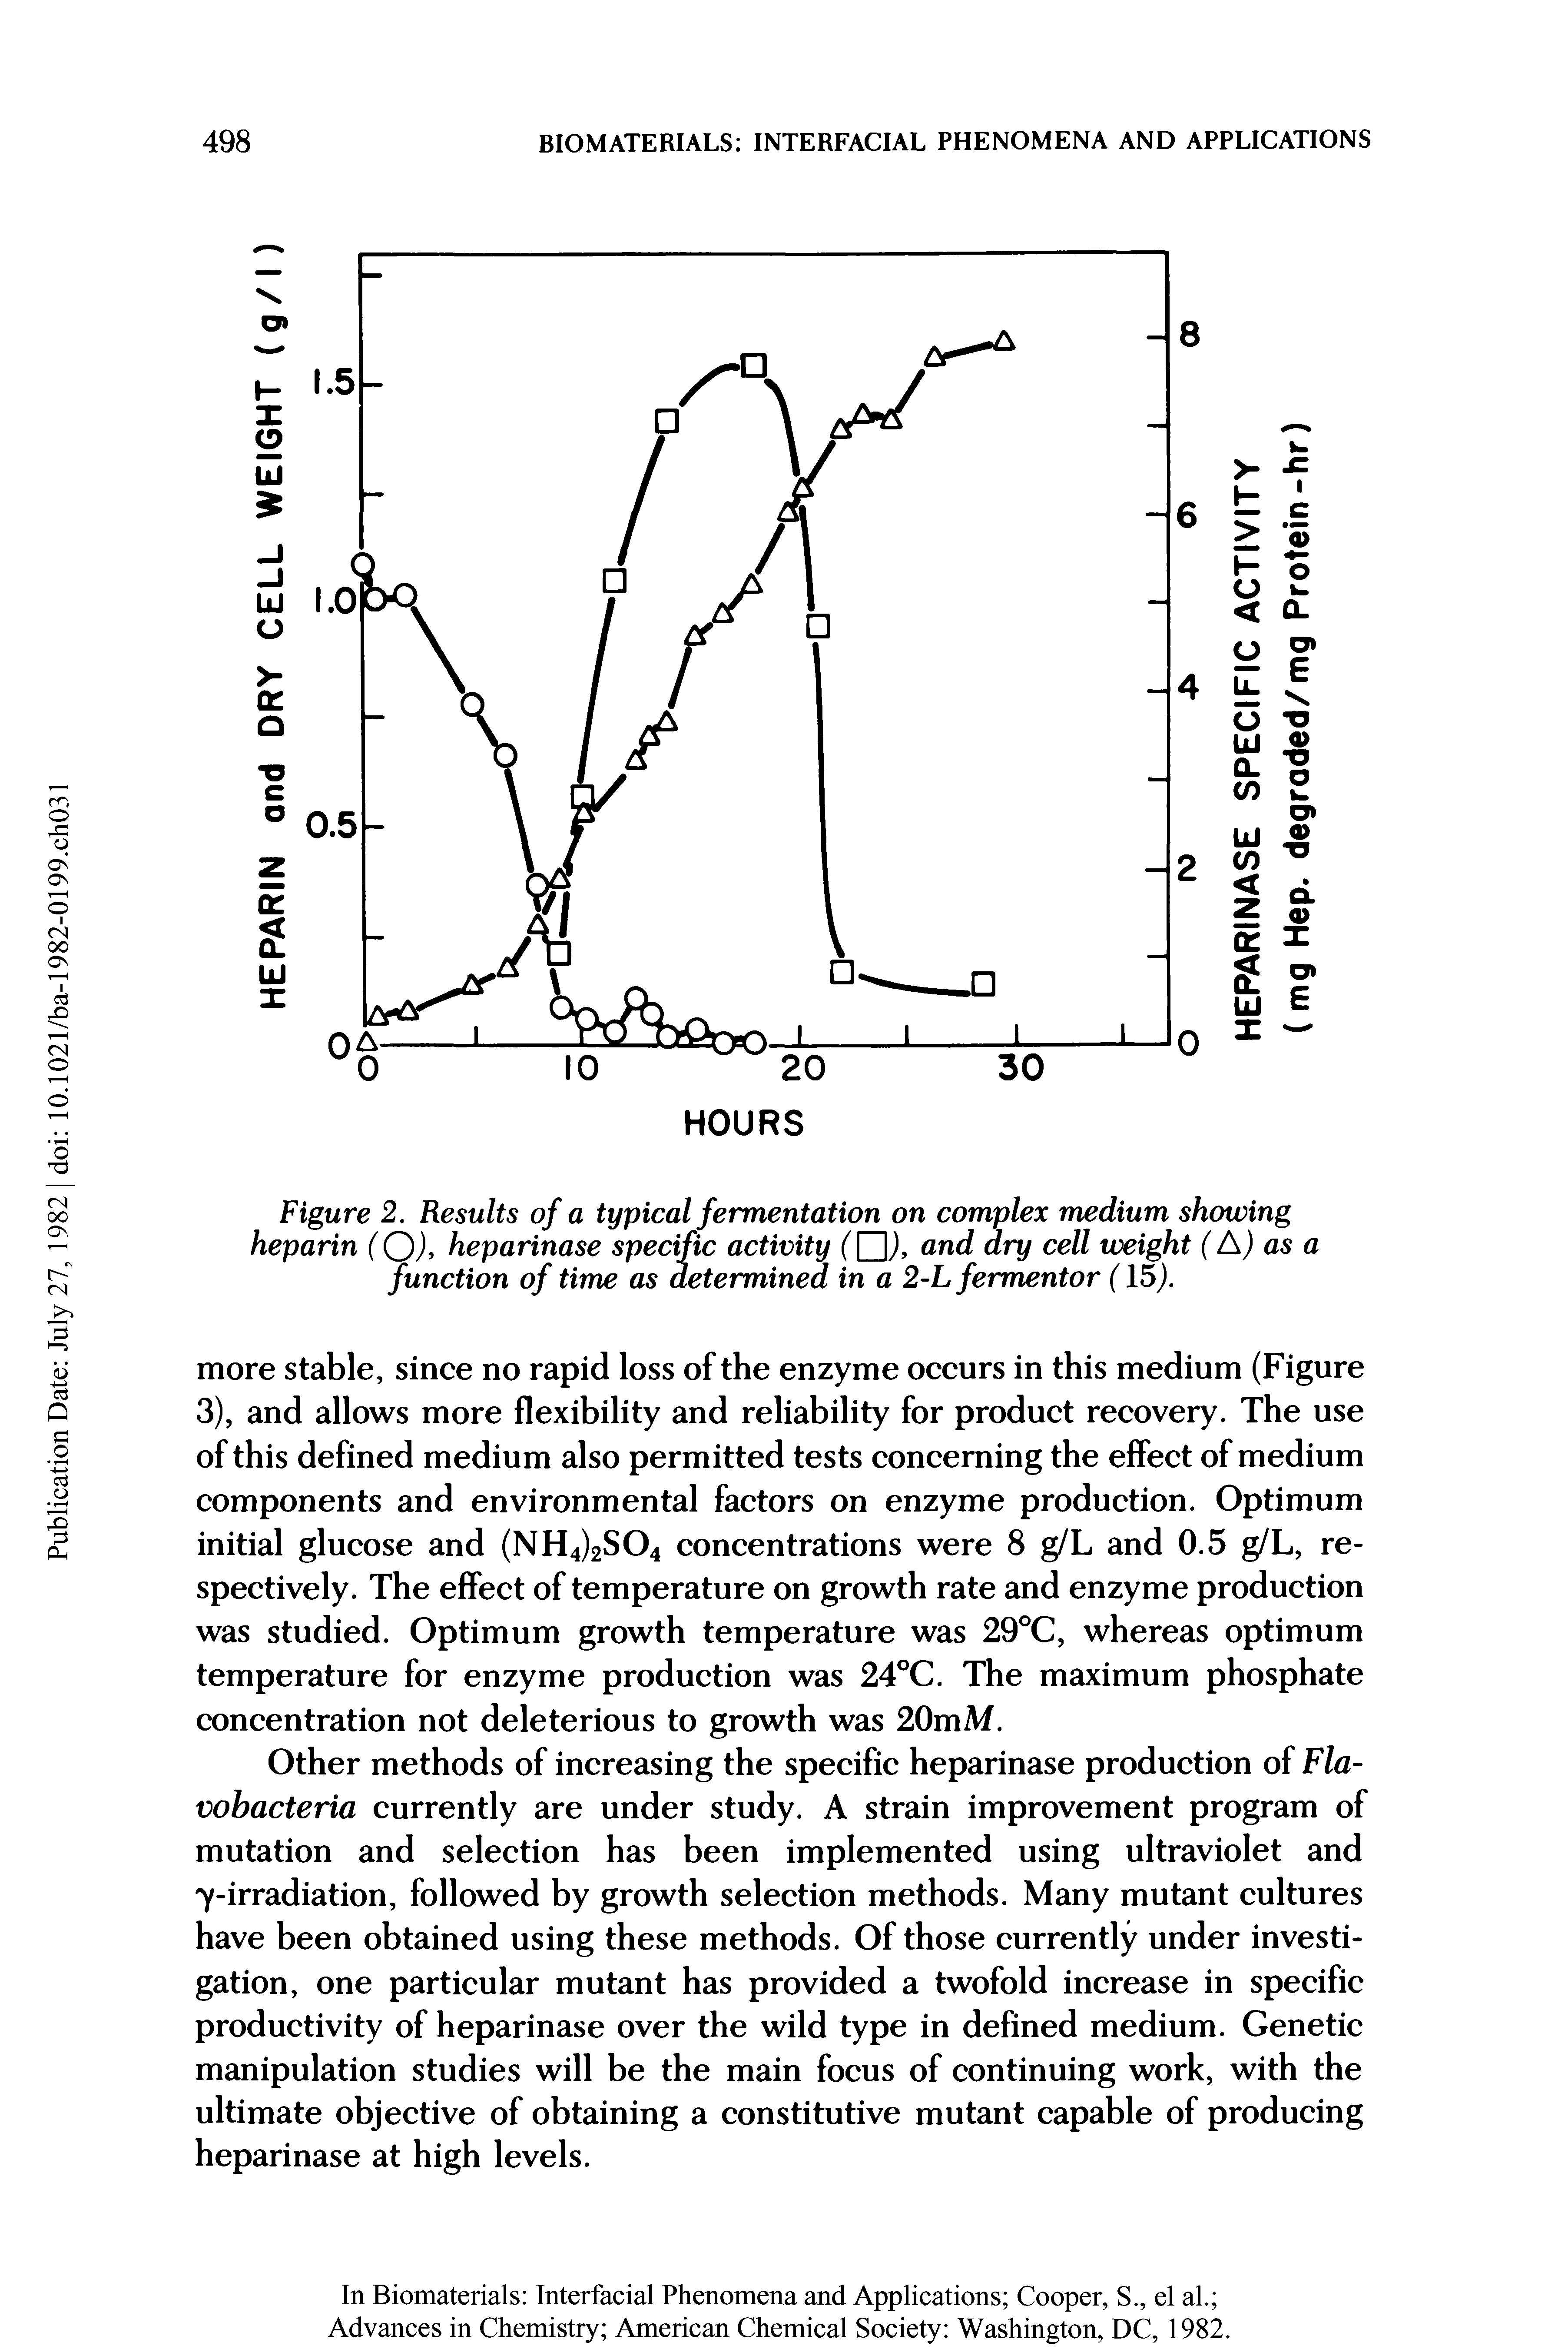 Figure 2. Results of a typical fermentation on complex medium showing heparin (Q), heparinase specific activity (Q), and ary cell weight (A) as a function of time as determined in a 2-L fermentor (15).